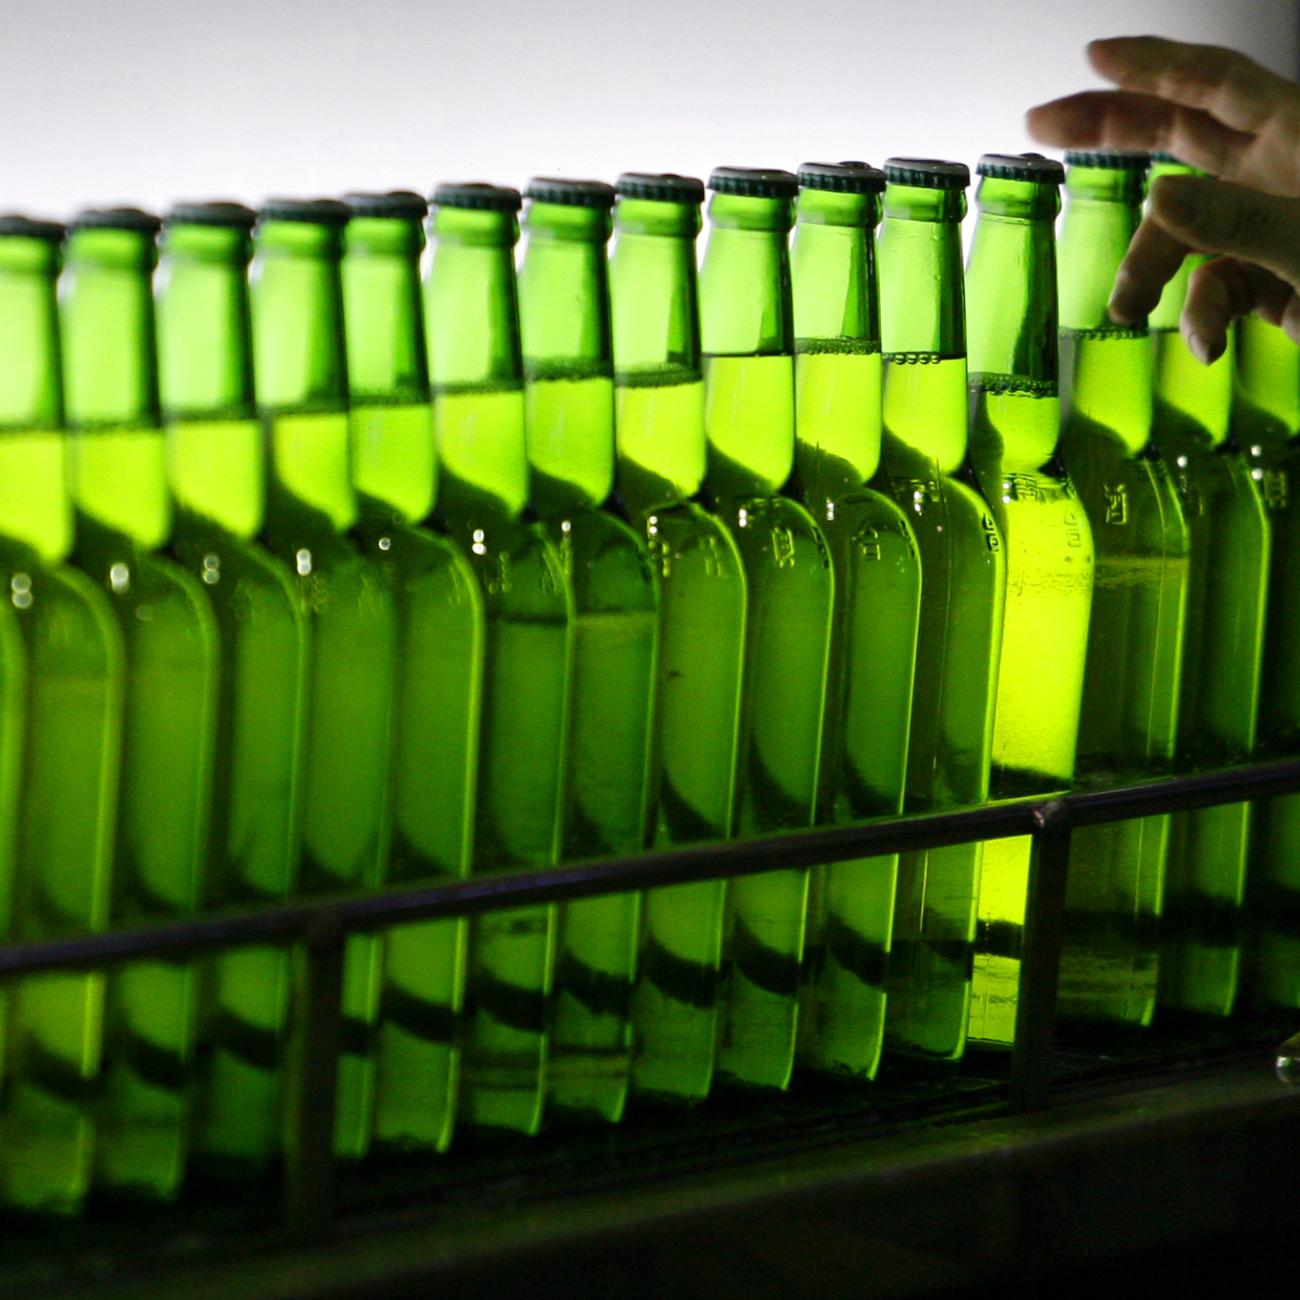 A man picks a green bottle at an assembly line inside the Taiwan Beer factory in Jhunan, Miaoli County, Taiwan, February 13, 2008.